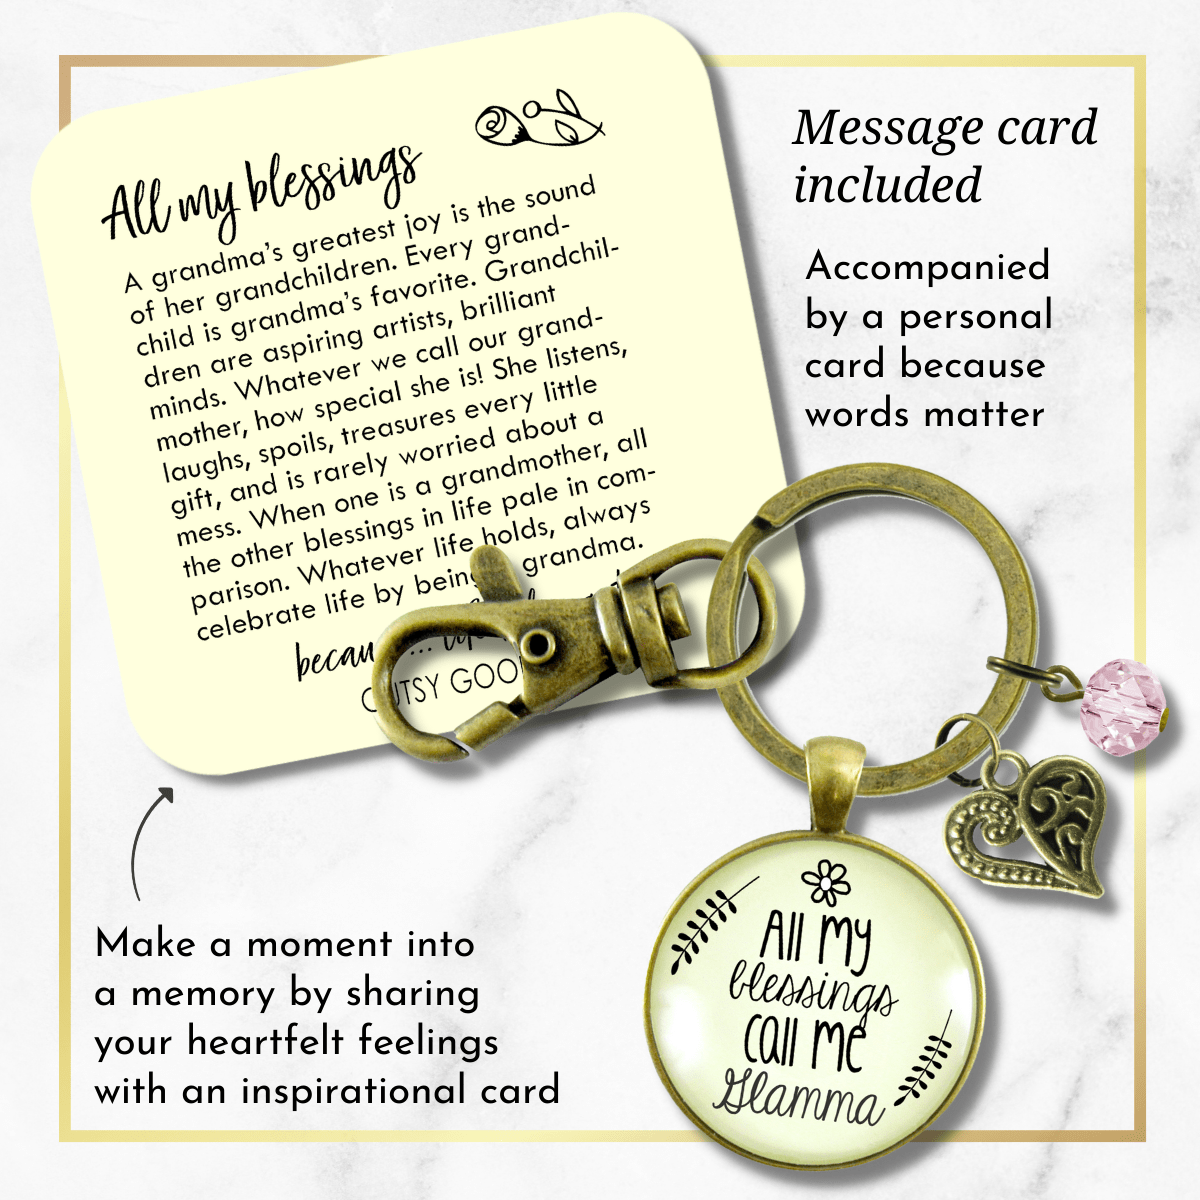 Glamma Keychain All My Blessings Young At Heart Grandma Womens Family Gift Jewelry - Gutsy Goodness Handmade Jewelry;Glamma Keychain All My Blessings Young At Heart Grandma Womens Family Gift Jewelry - Gutsy Goodness Handmade Jewelry Gifts